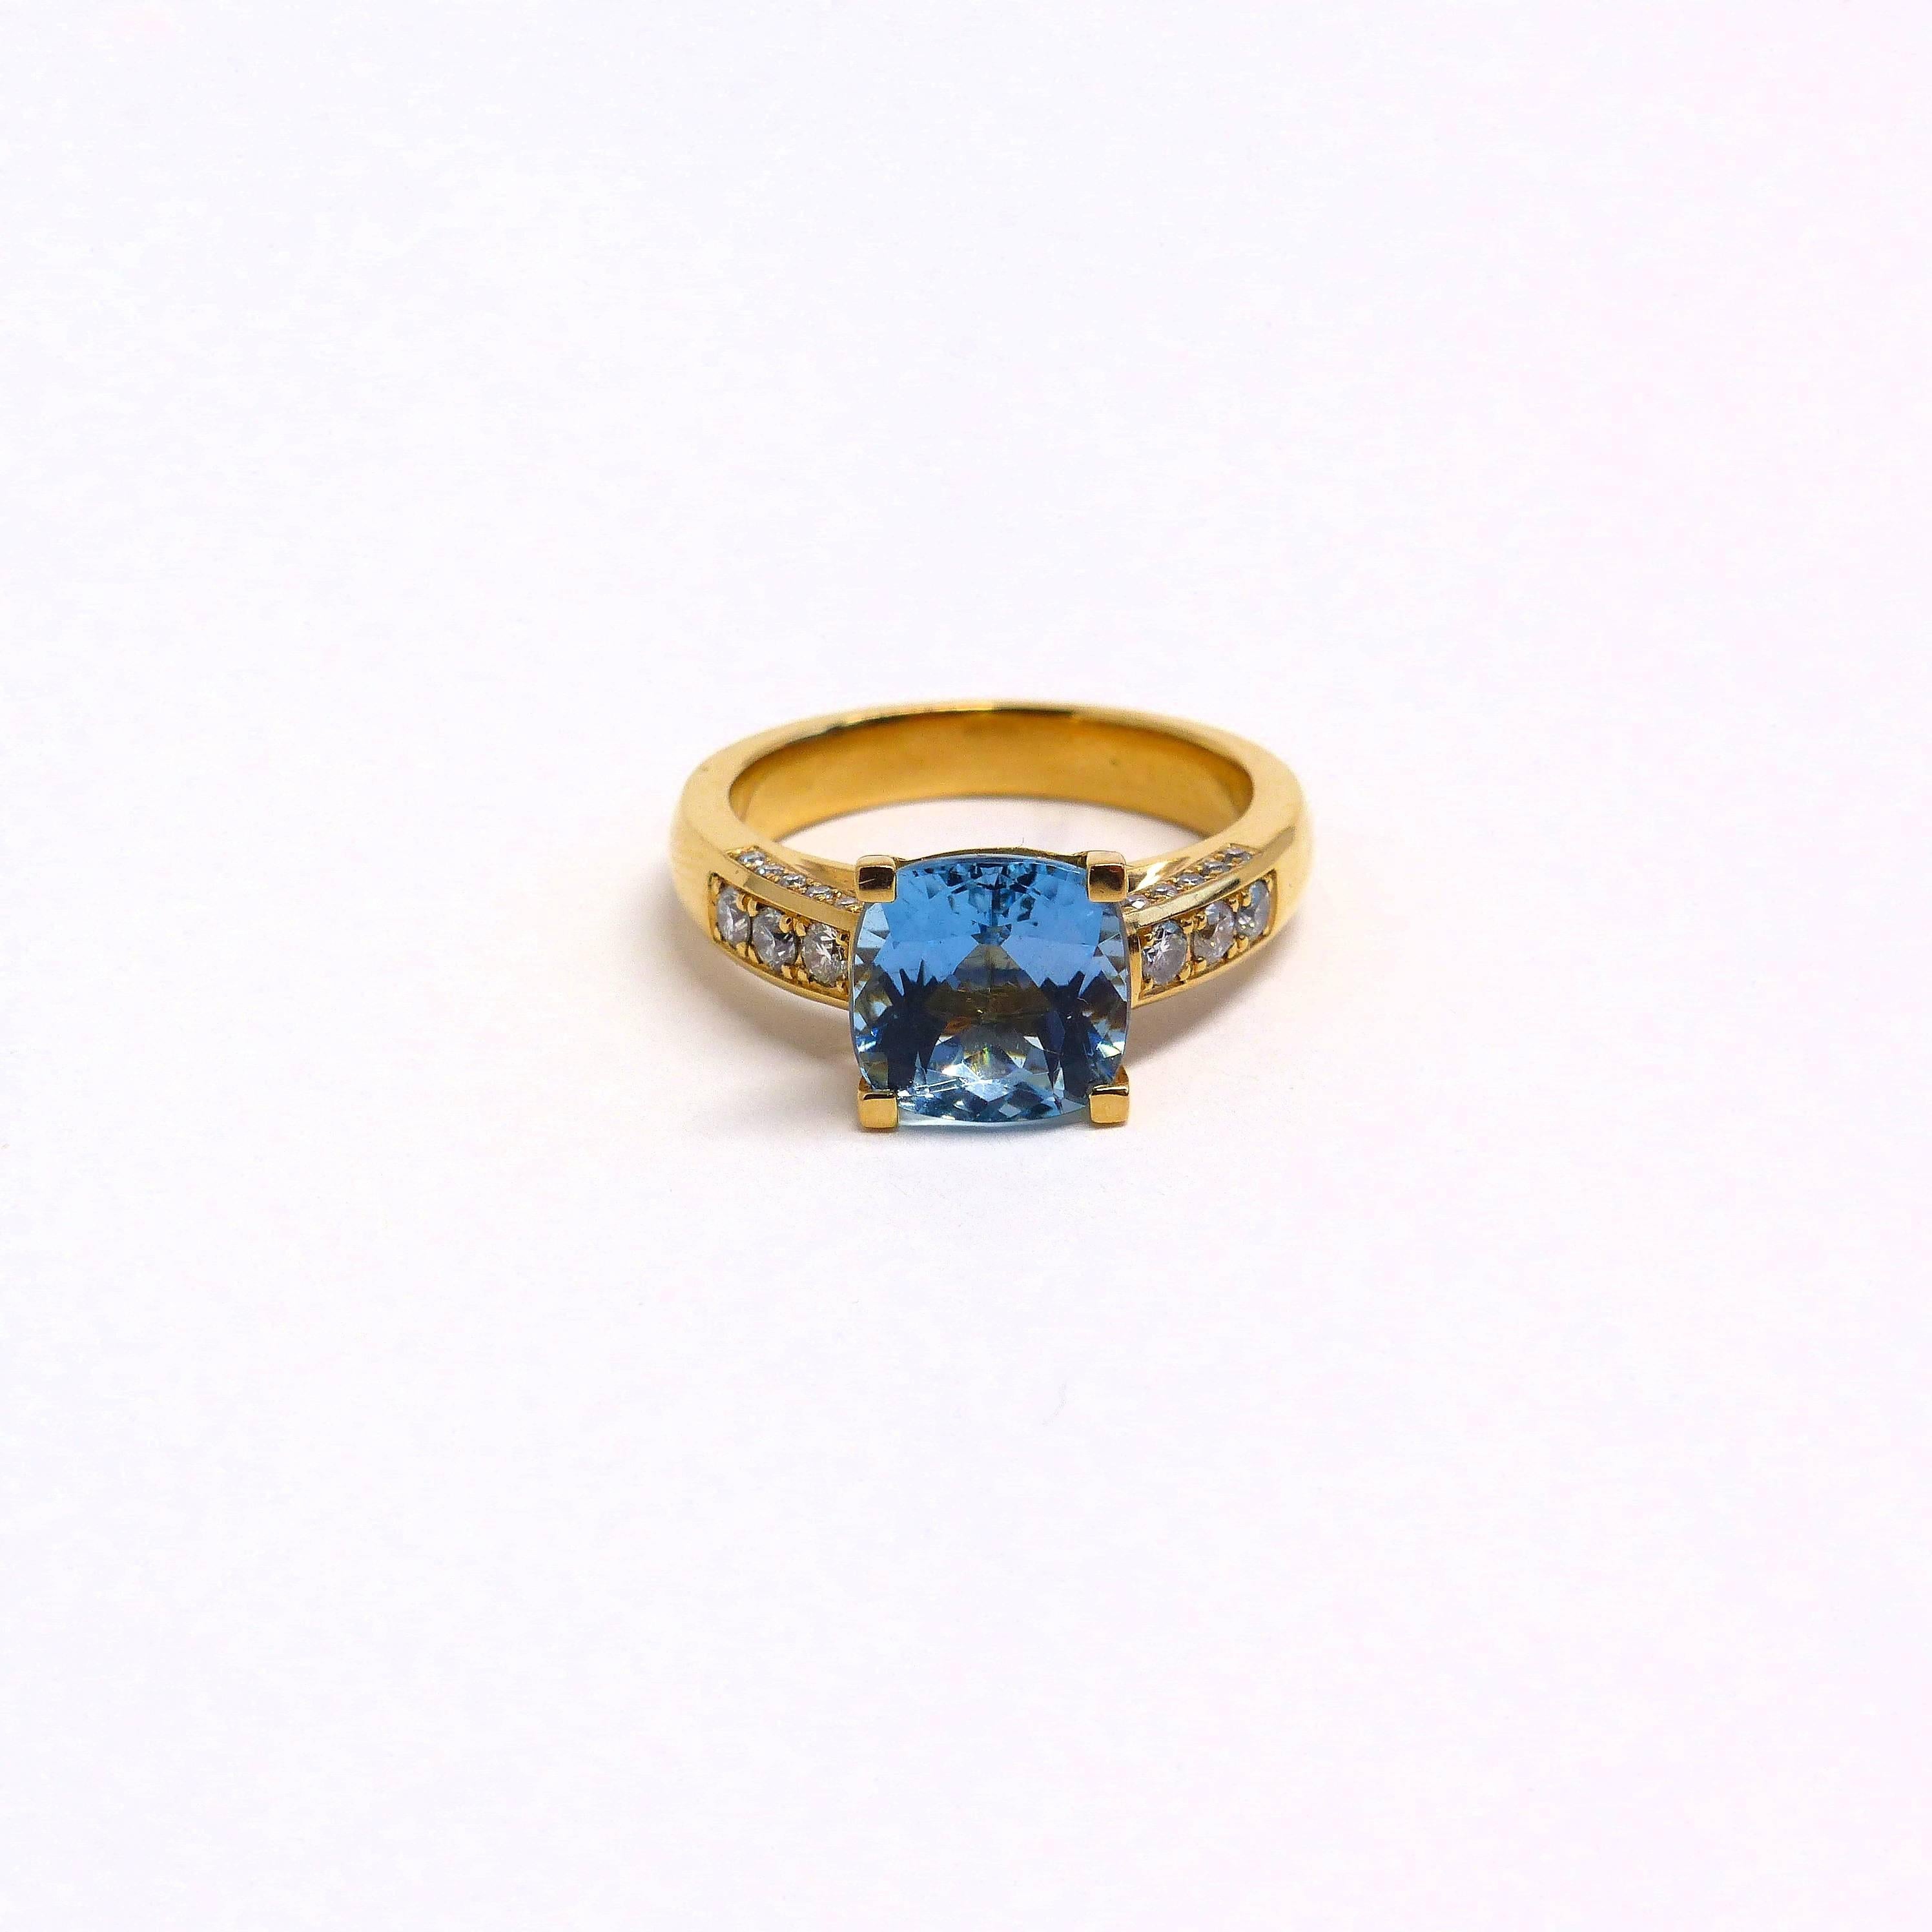 Thomas Leyser is renowned for his contemporary jewellery designs utilizing fine coloured gemstones and diamonds. 

This ring in 18k rose gold is set with a fine Aquamarine cushion shape 8.5mm, accentuated by some 26 diamonds pavé, 1mm, 0,32cts.